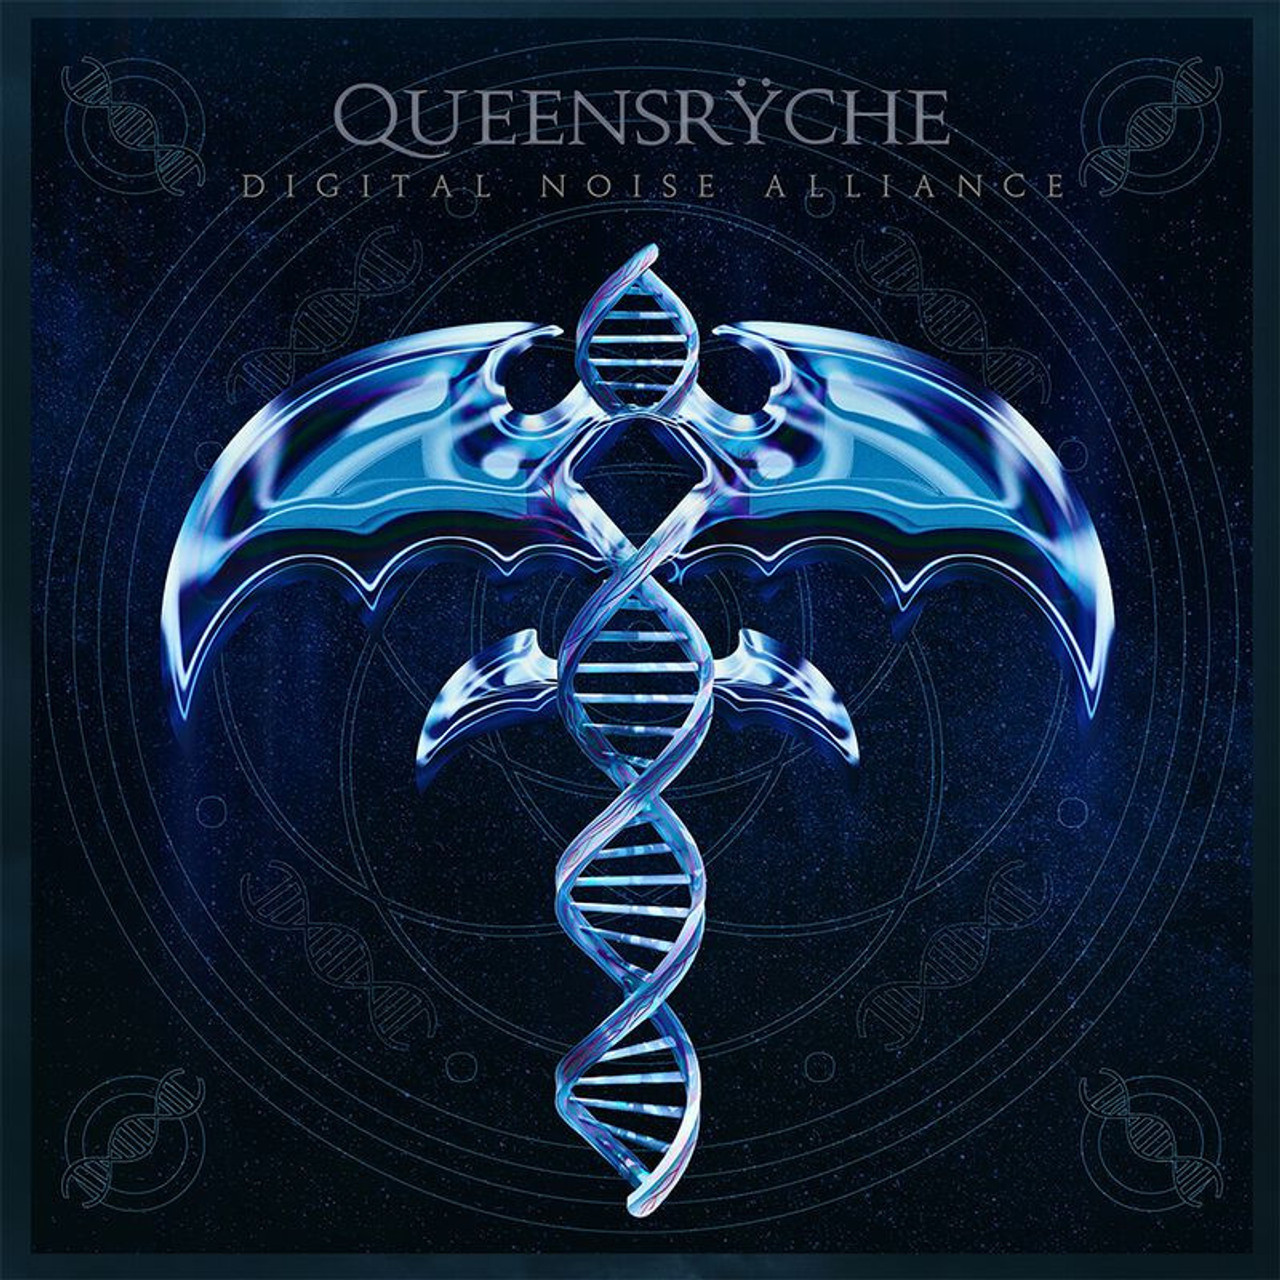 PRE-ORDER - Queensryche 'Digital Noise Alliance' CD Box Set - RELEASE DATE 7th October 2022